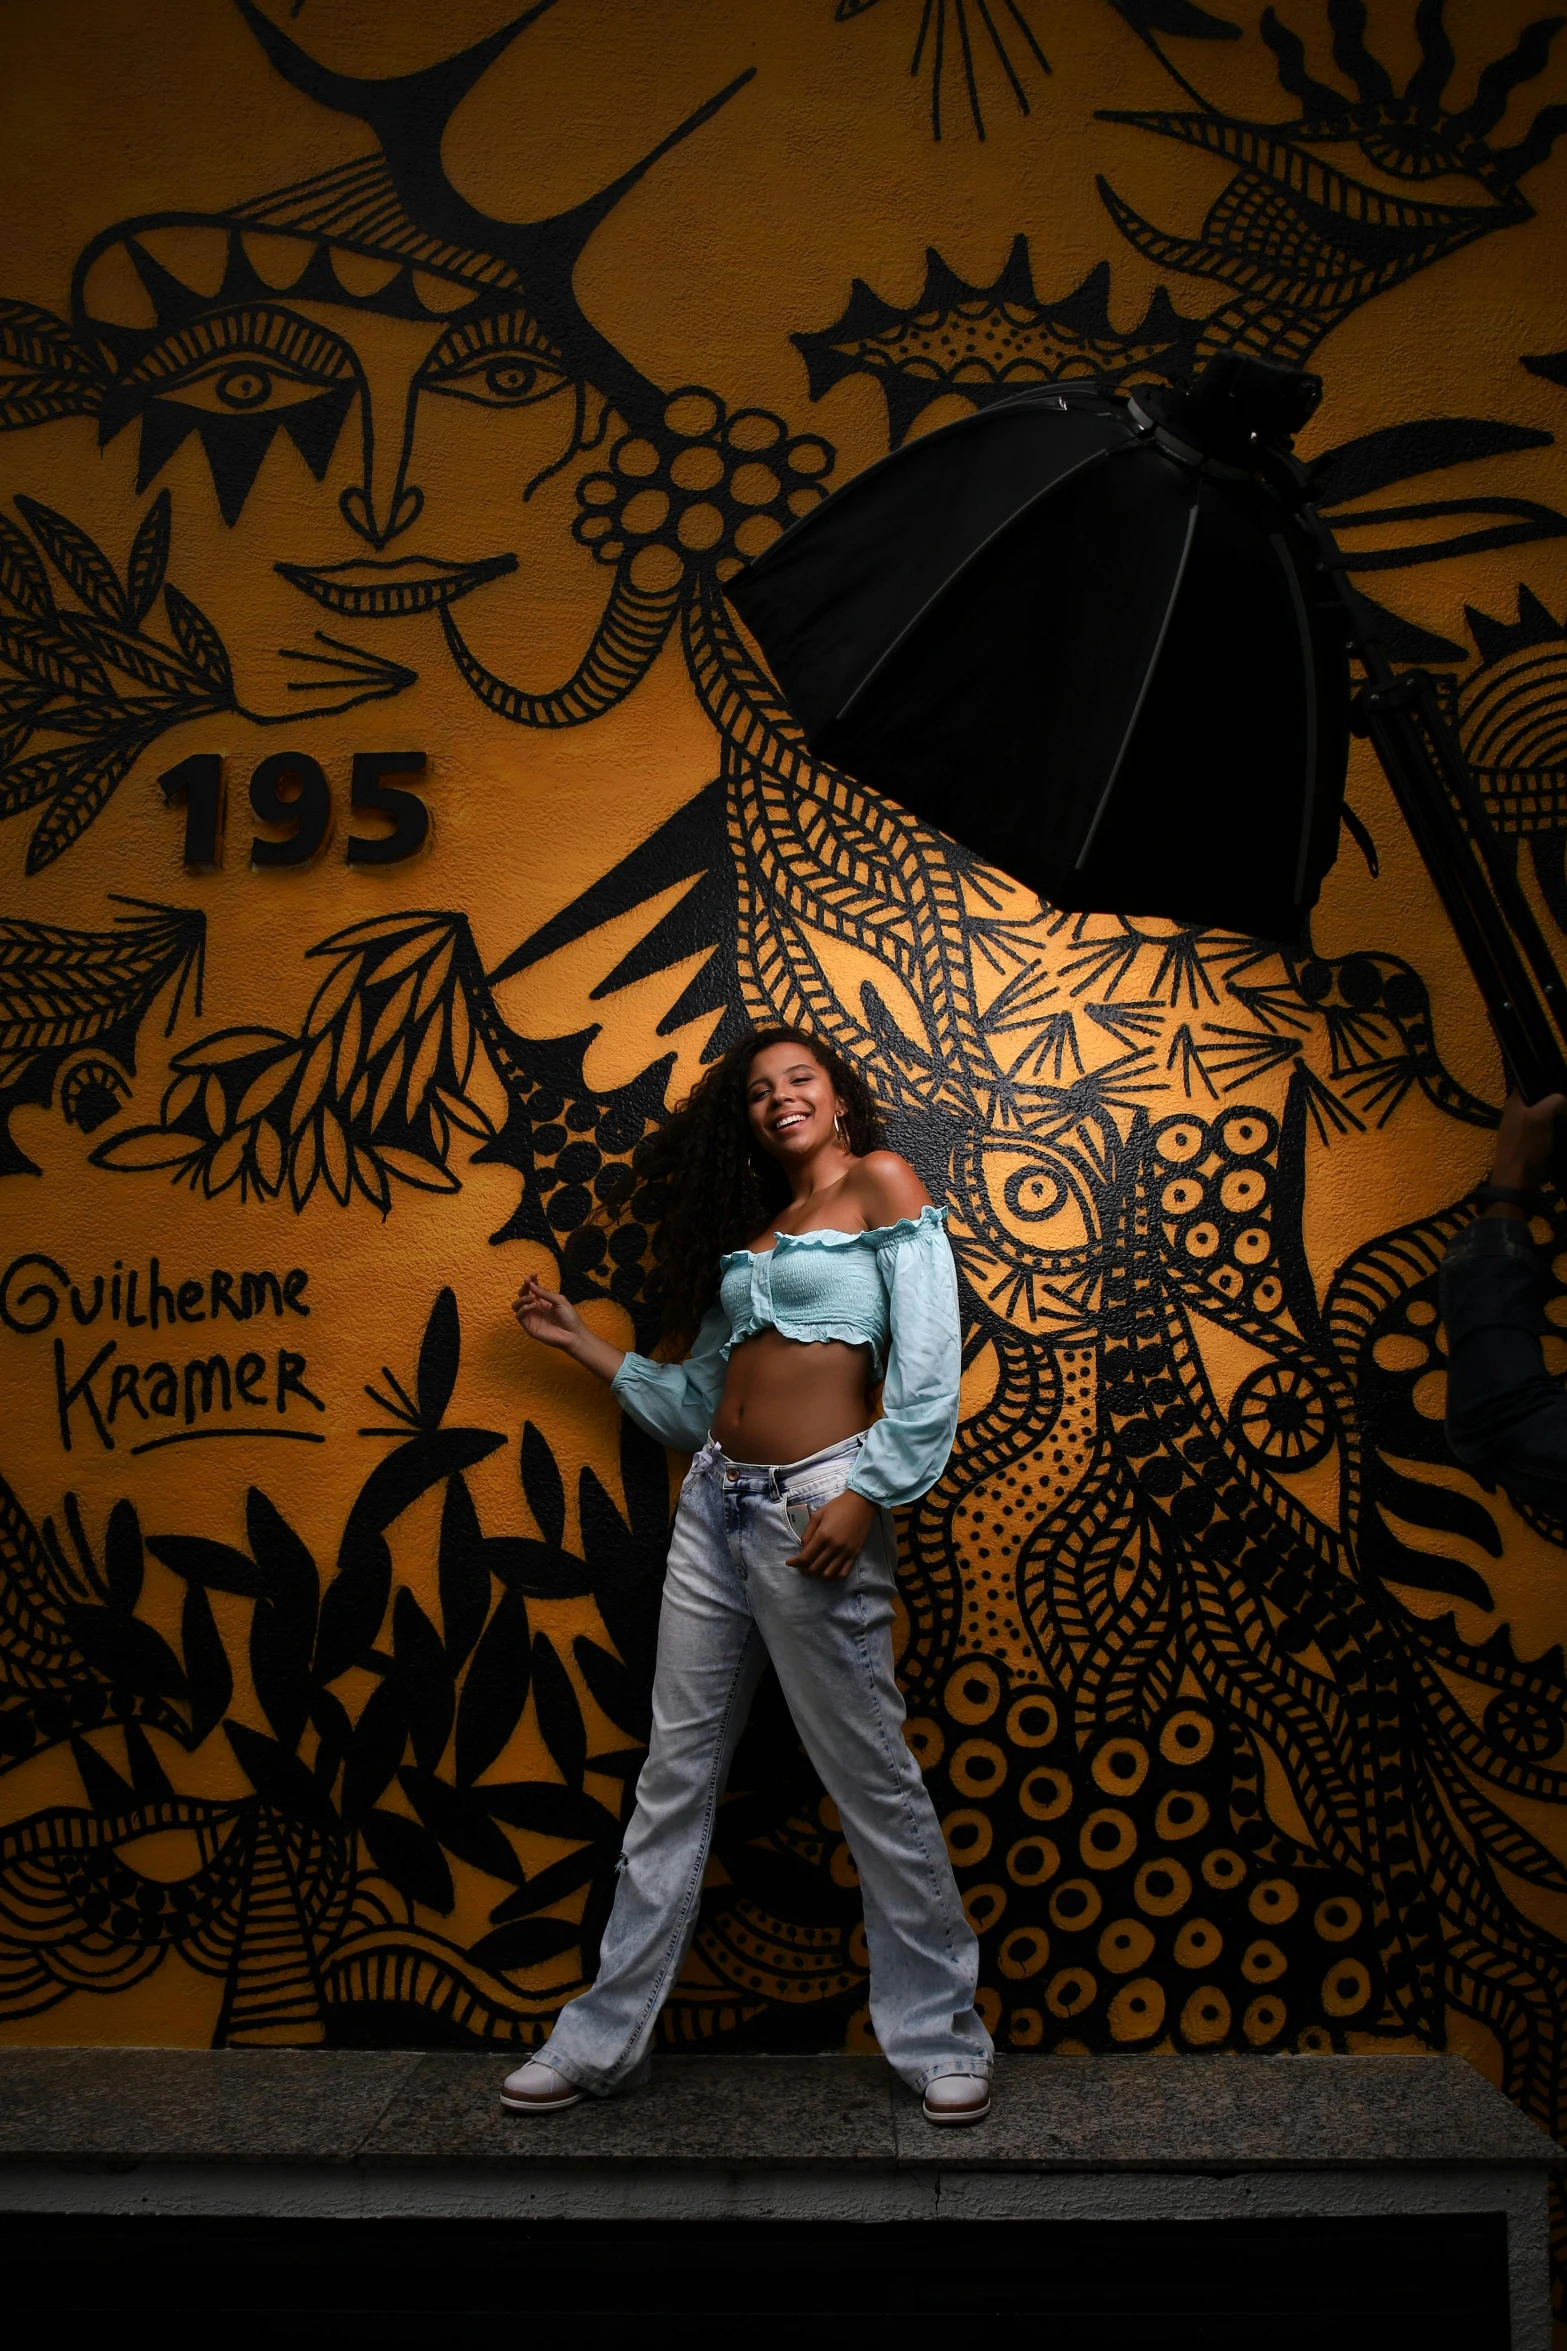 a woman standing in front of a wall with a black umbrella, an album cover, inspired by Fritz Glarner, shutterstock contest winner, graffiti, 2 5 6 x 2 5 6, madison beer girl portrait, keith harring, photographed for reuters